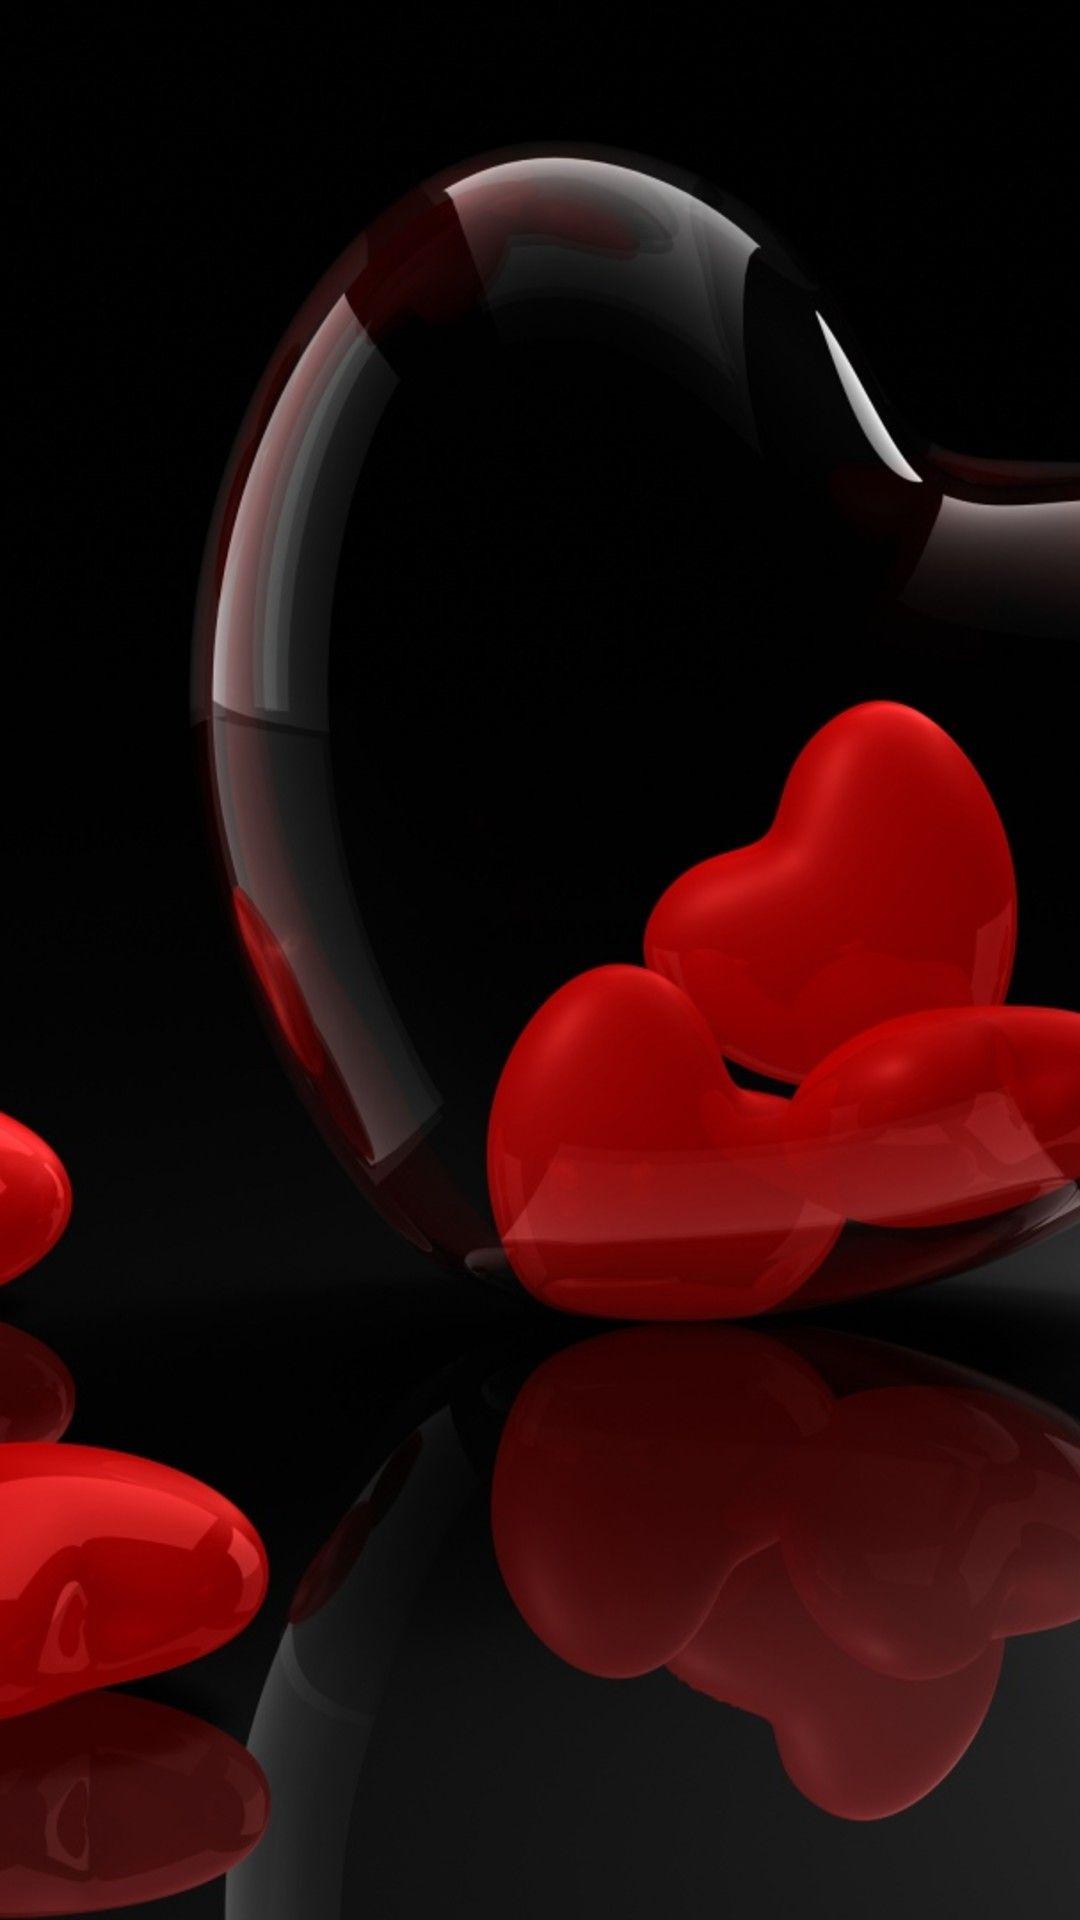 1080x1920px Red Hearts Black Background